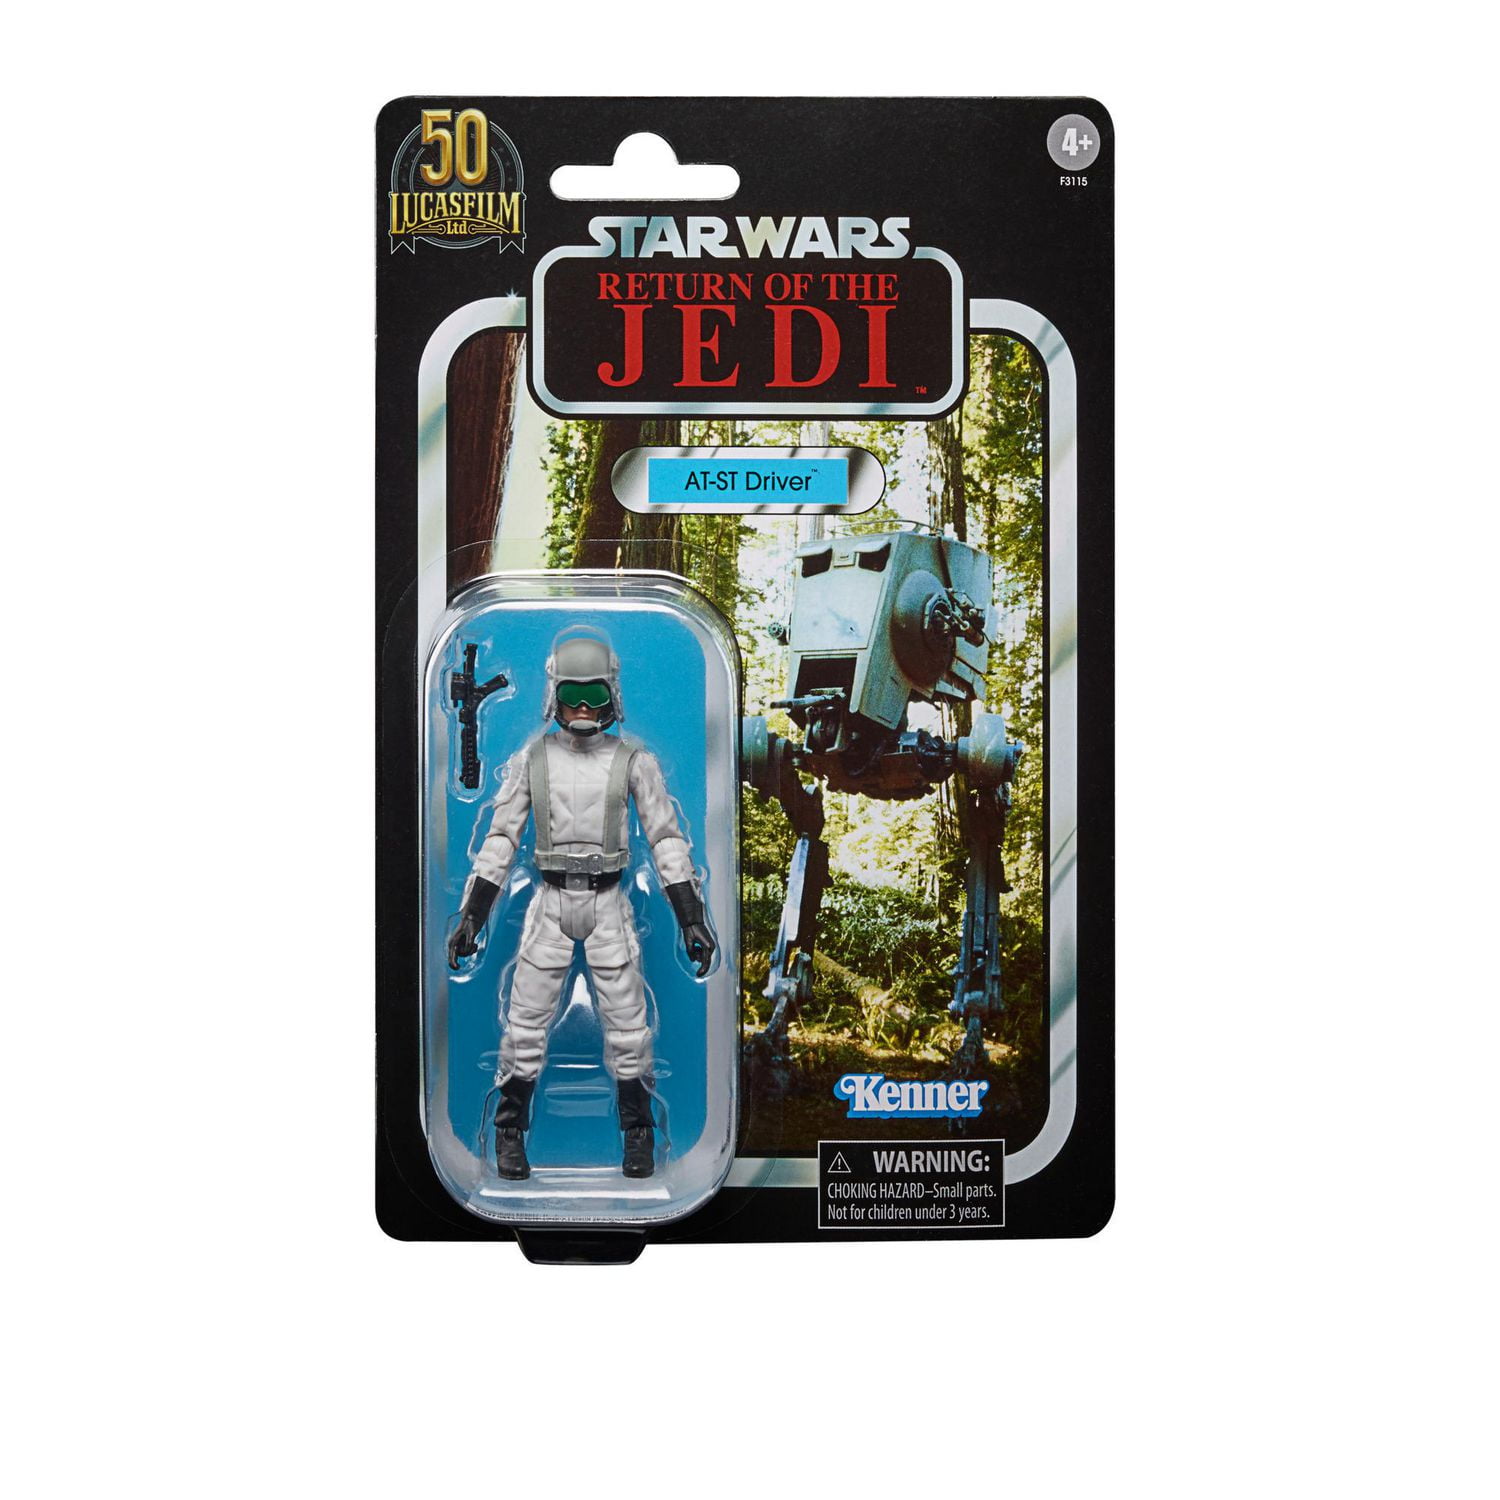 Star Wars The Vintage Collection AT-ST Driver Toy, 3.75-Inch-Scale  Lucasfilm First 50 Years Star Wars Original Trilogy Figure, Ages 4 and Up 